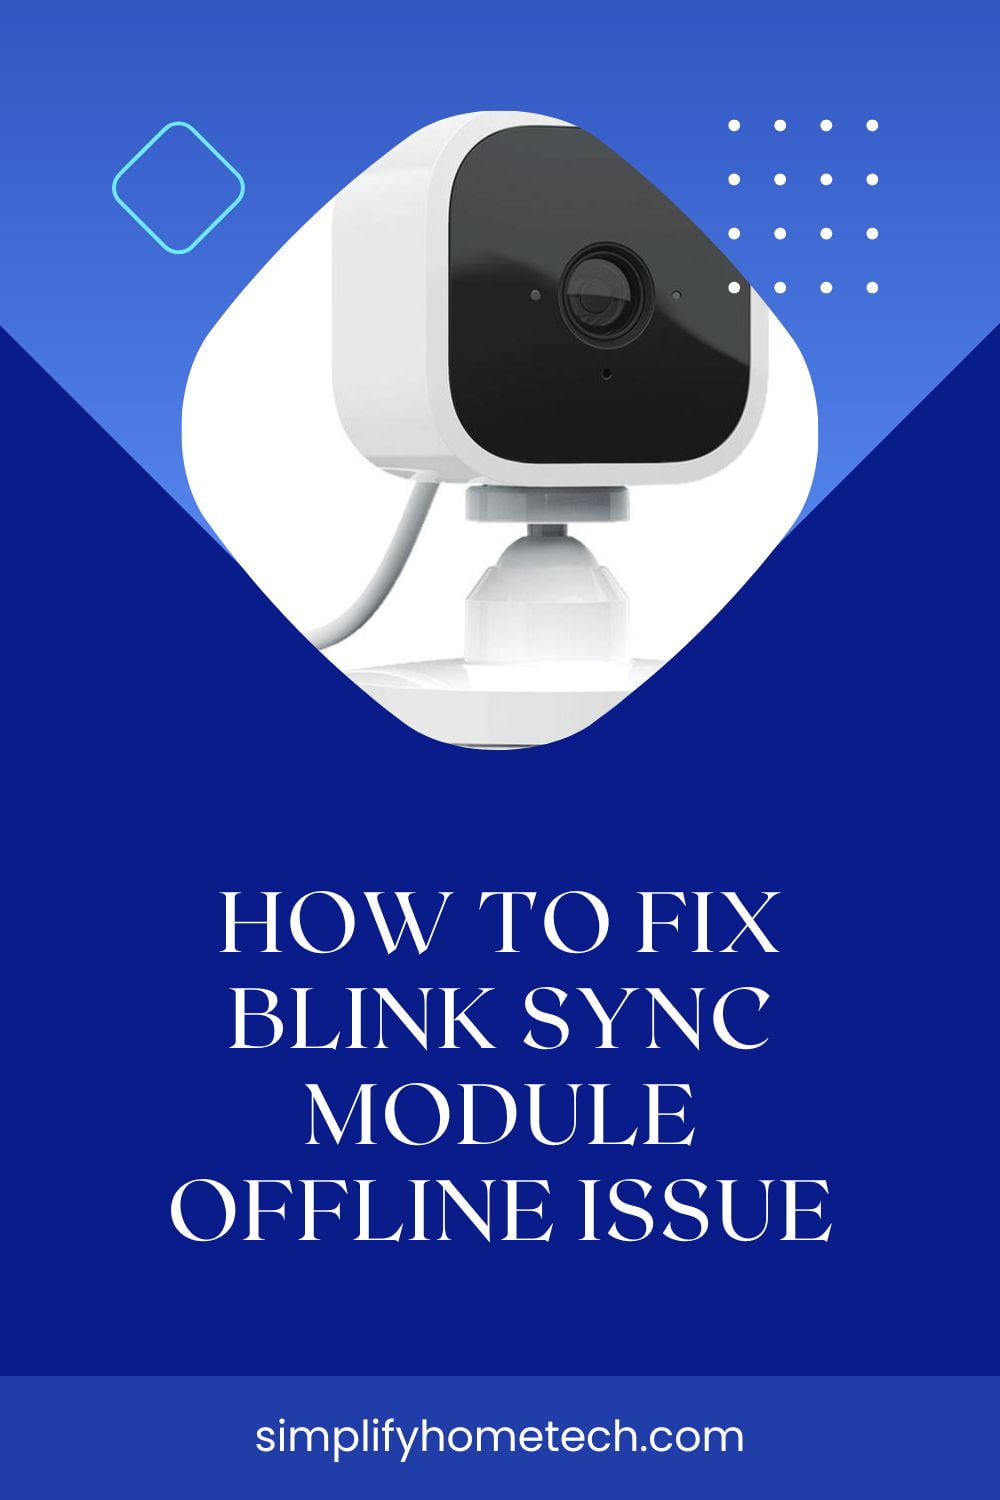 How To Fix Blink Sync Module Offline Issue